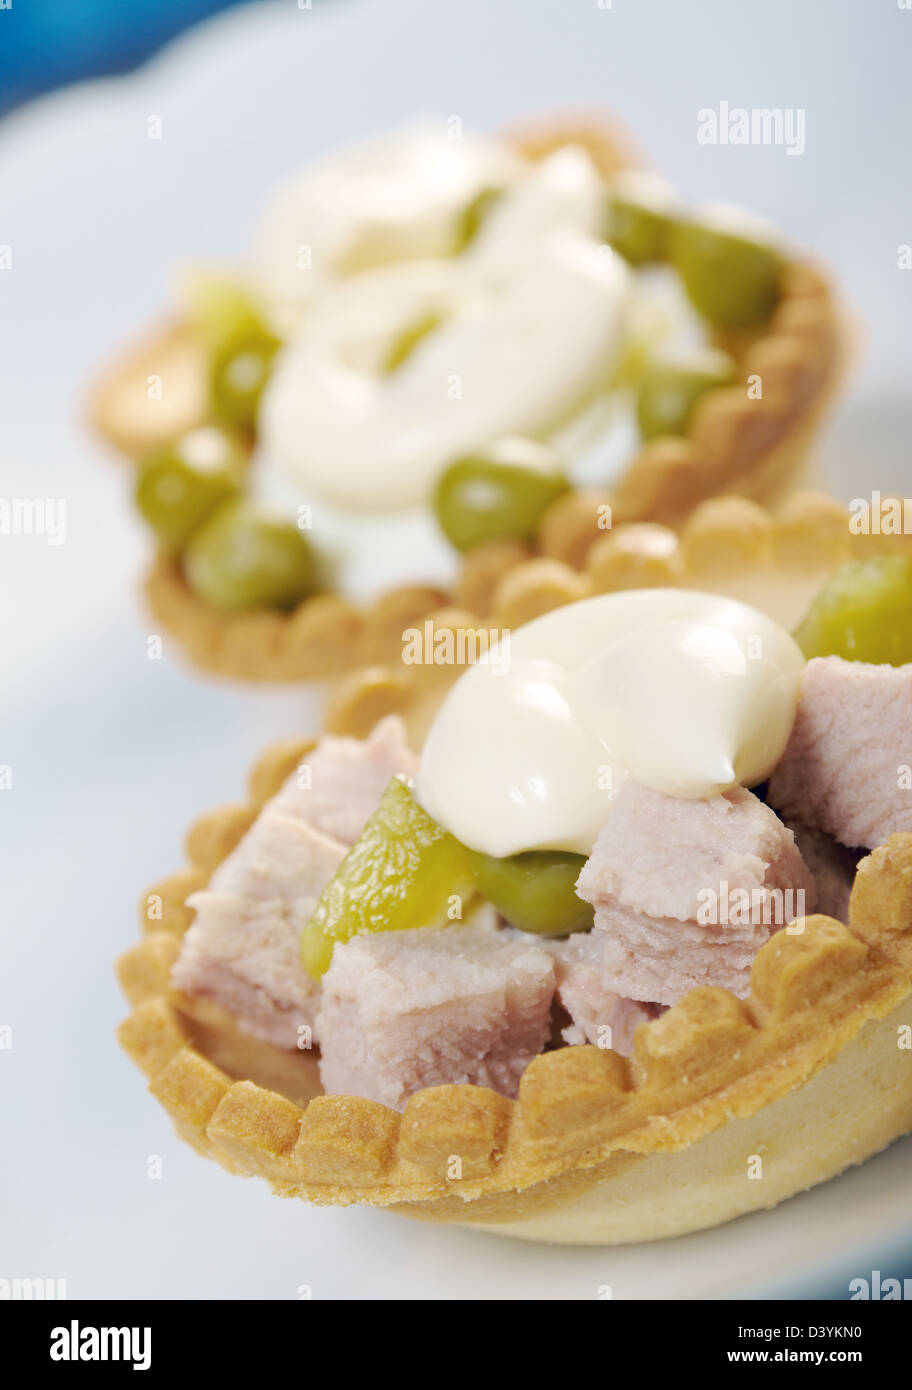 tartlet with salad on a white plate .Shallow depth-of-field Stock Photo